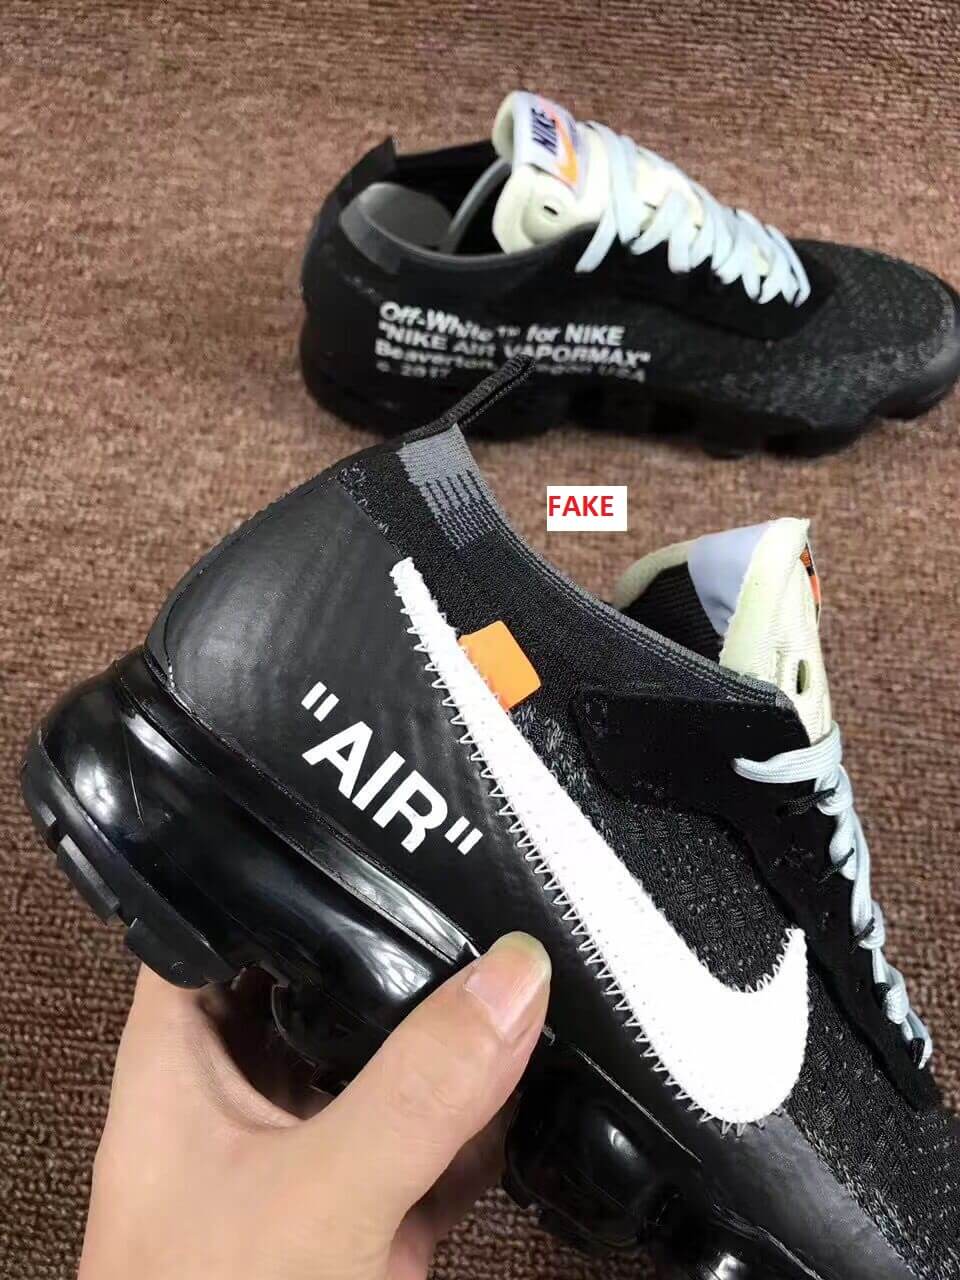 Scary Good Fake Off White Nike Vapormax Sneakers Are On Market ARCH-USA